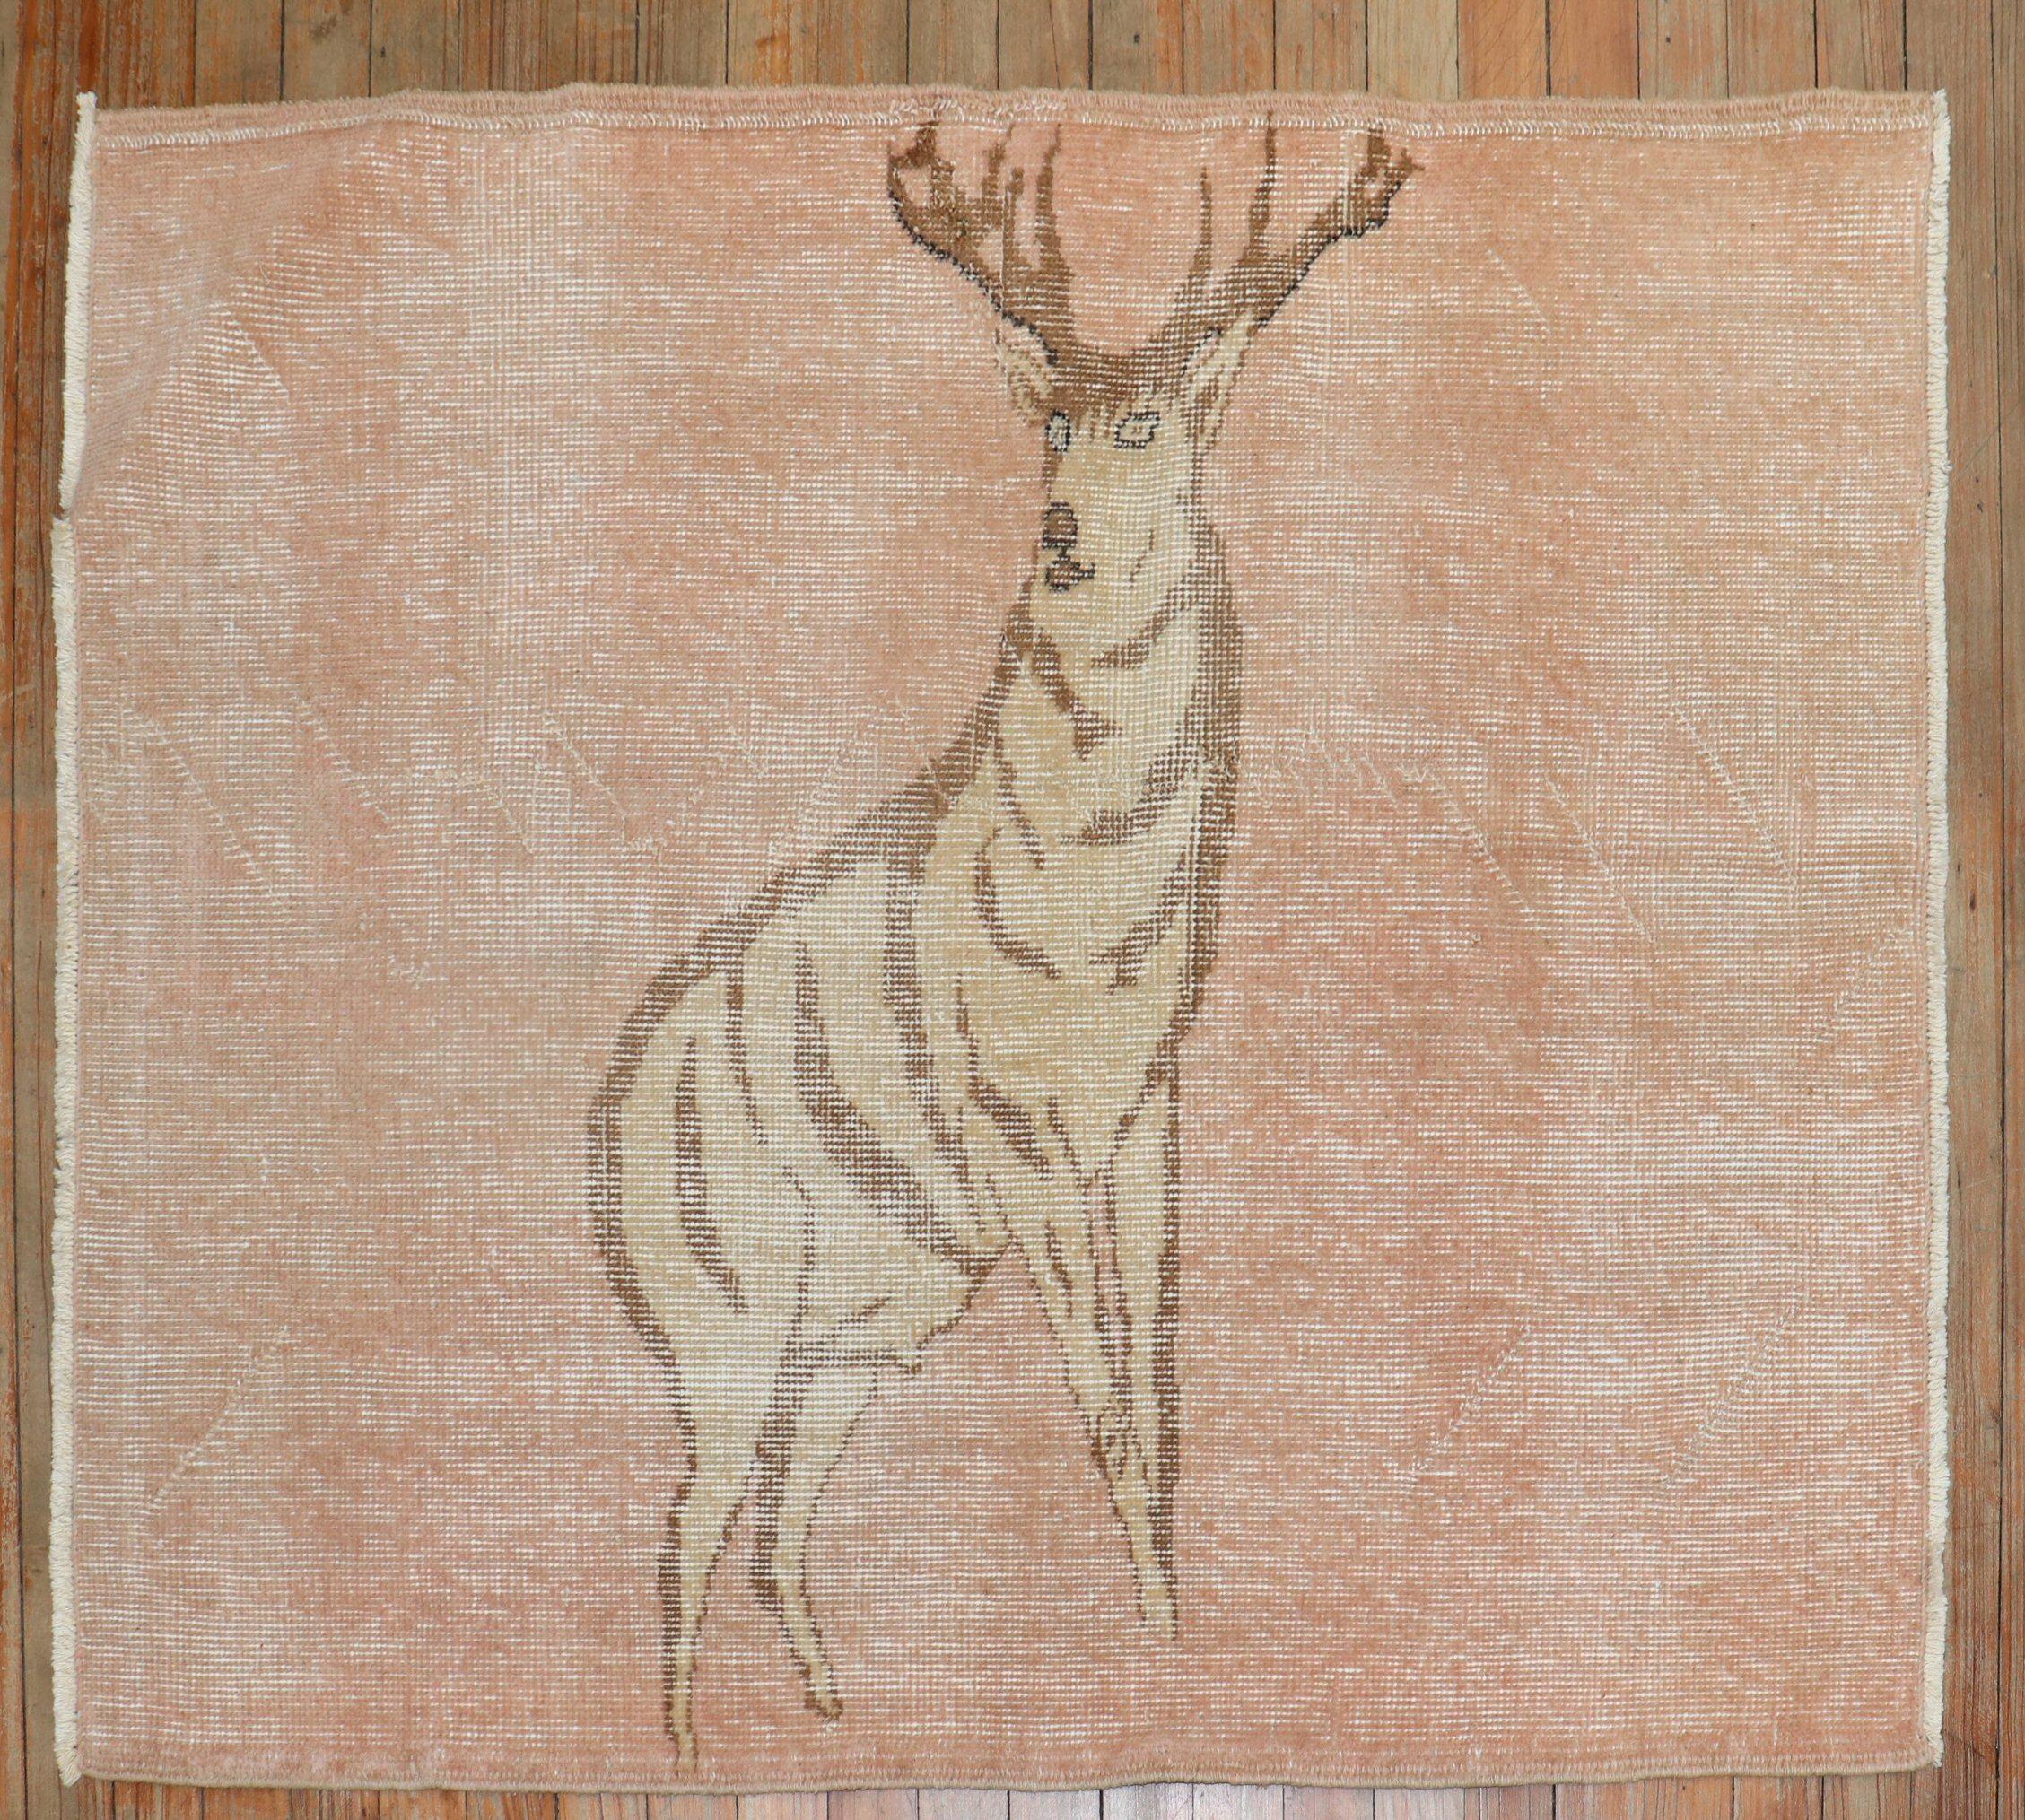 One of a kind hand-knotted Turkish Anatolian rug with stand-alone deer on a blush color ground

Measures: 3'3” x 3'11”.

